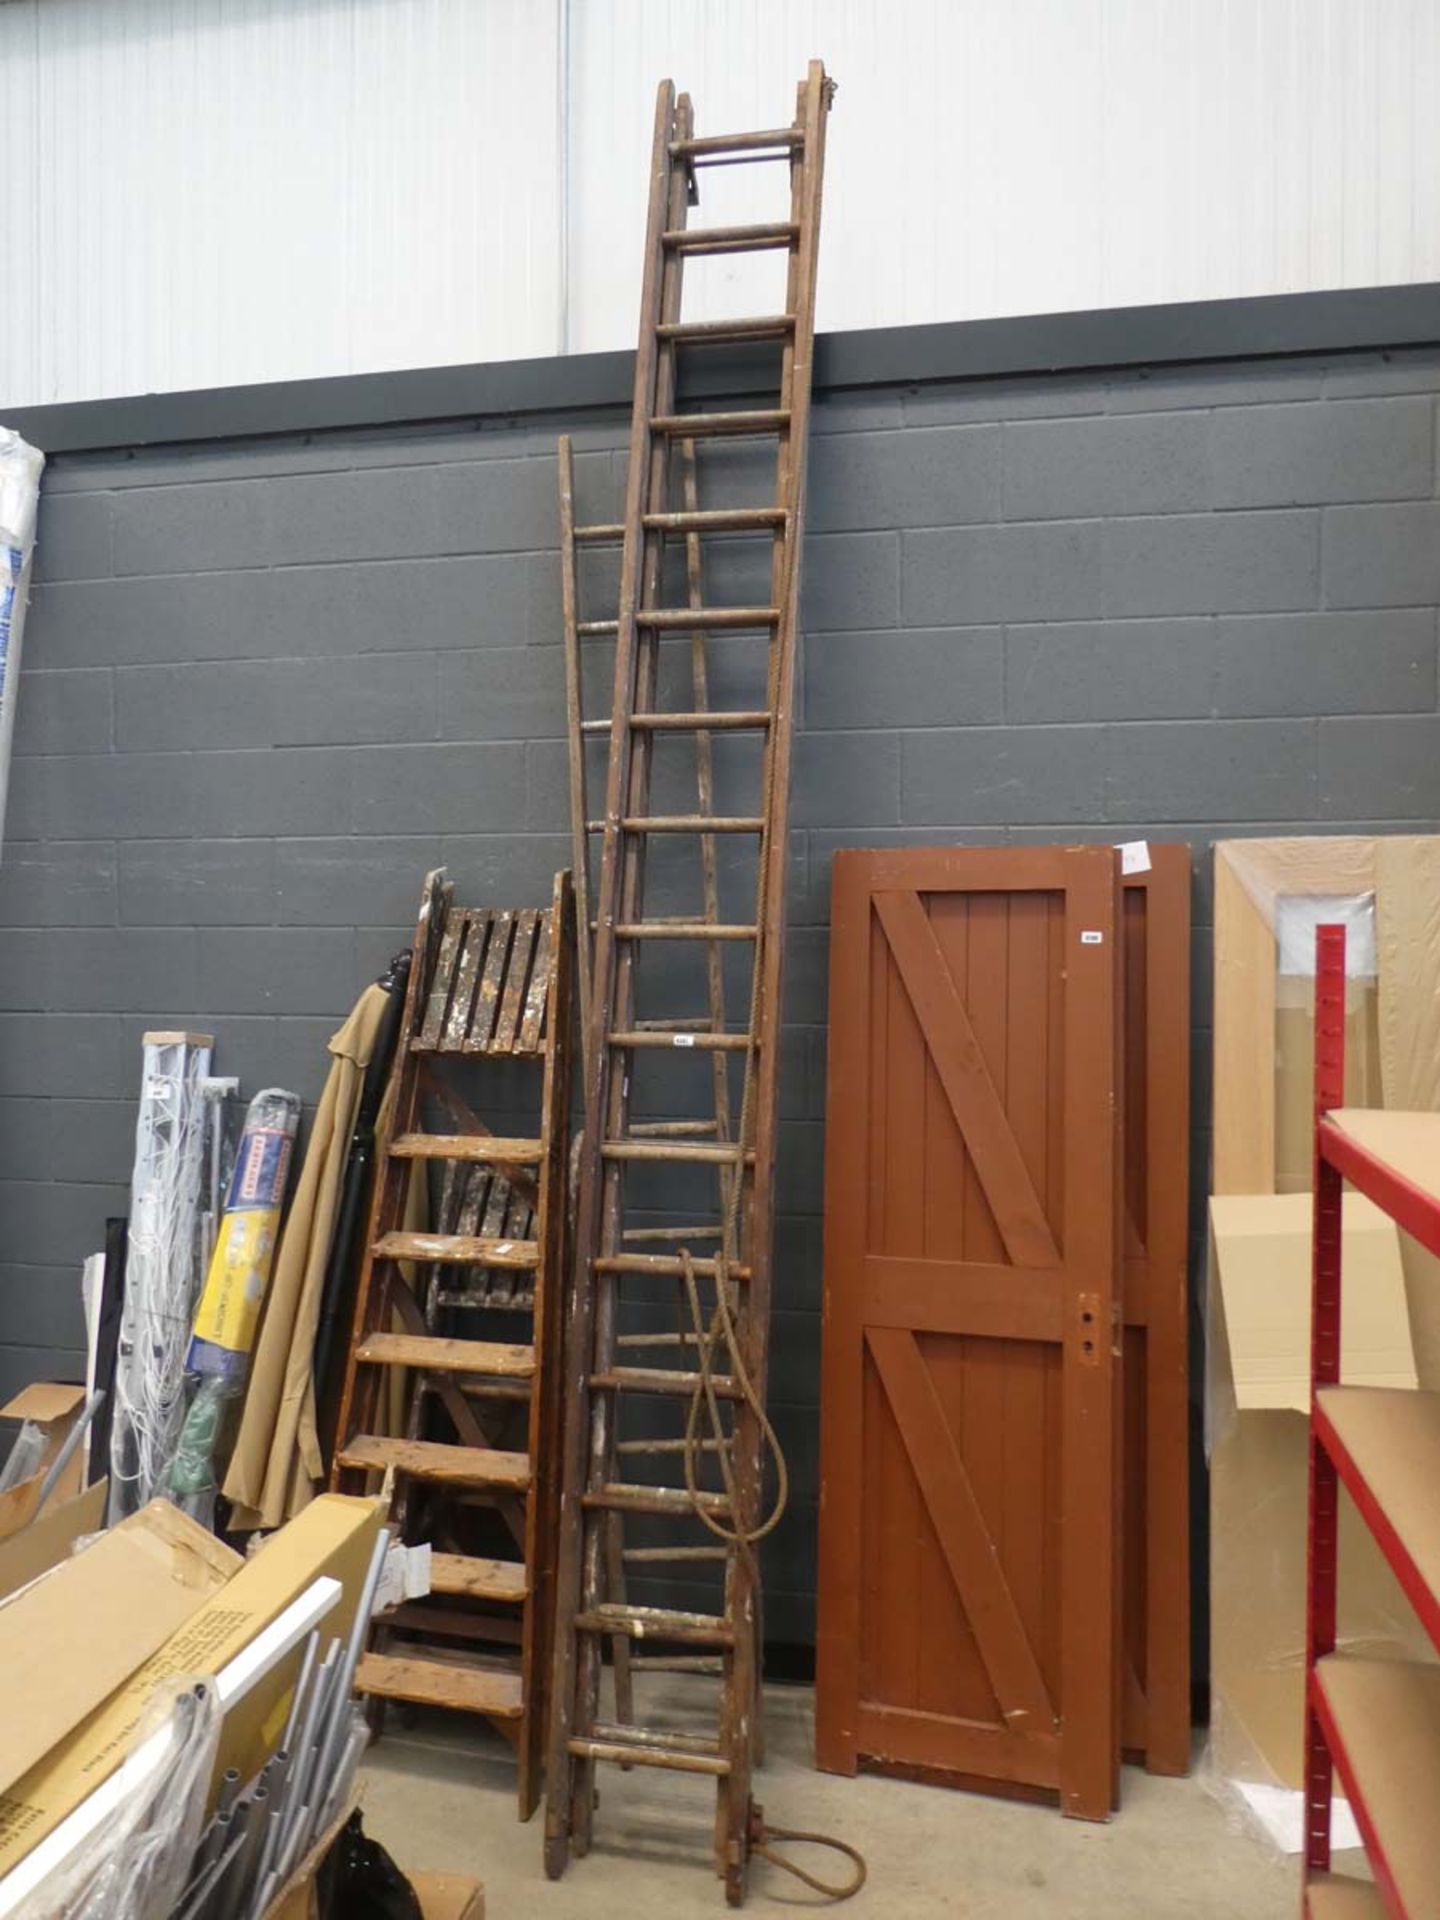 2 wooden ladders and 2 wooden stepladders